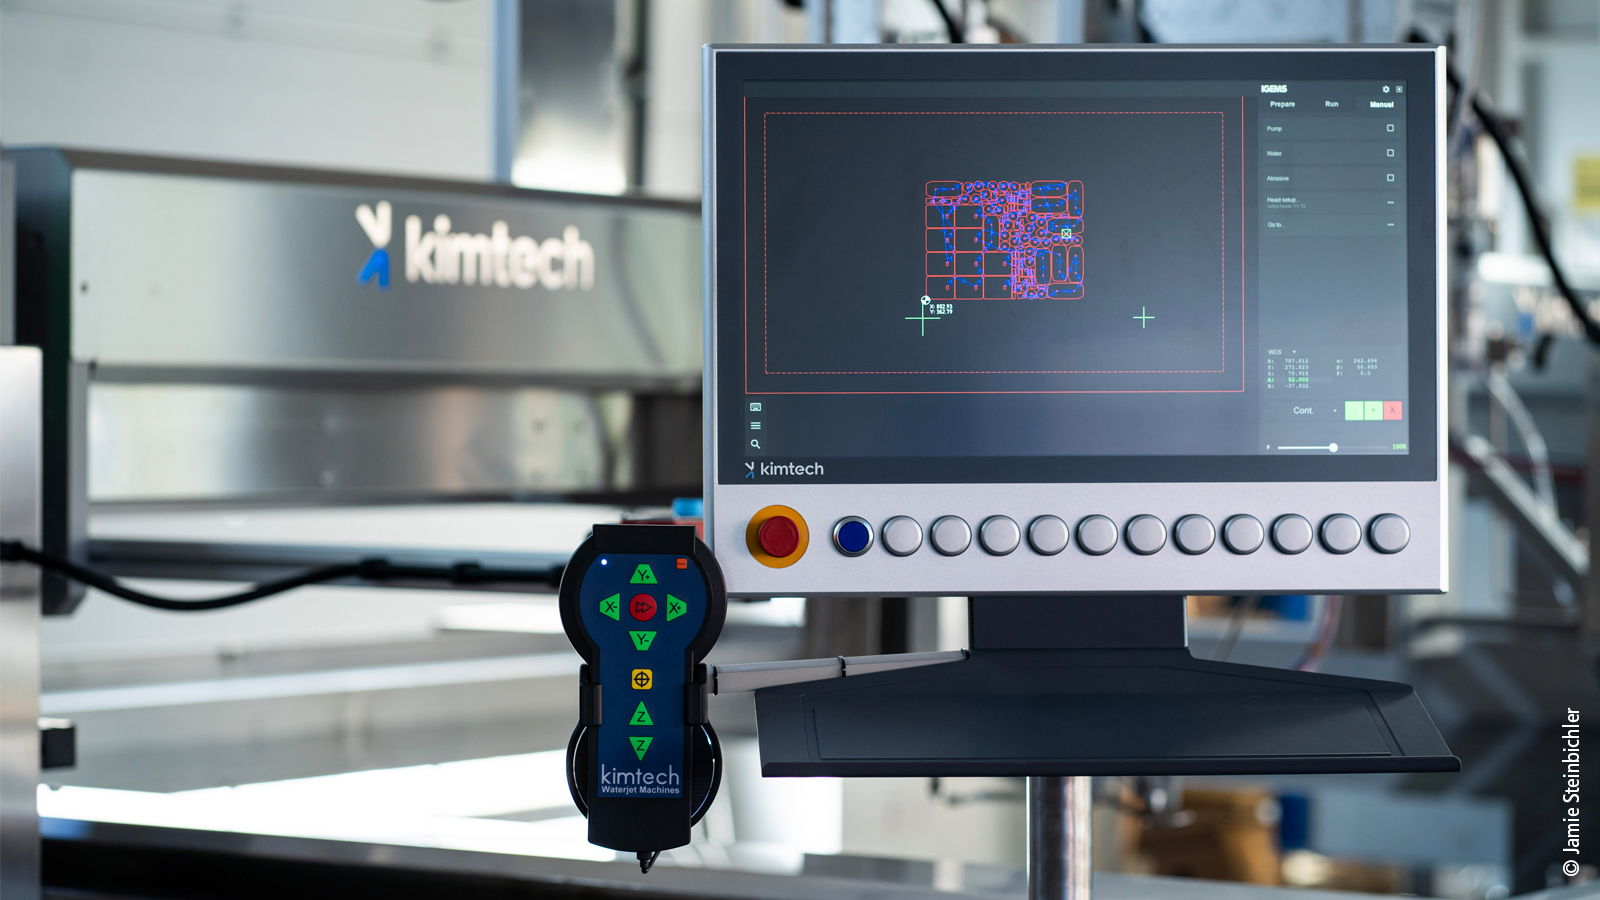 PC-based control helps to optimize offcuts: The contours of panels can be captured by a camera and read into the control system. The machine operator can then set the zero point of the pending production order in the user interface.